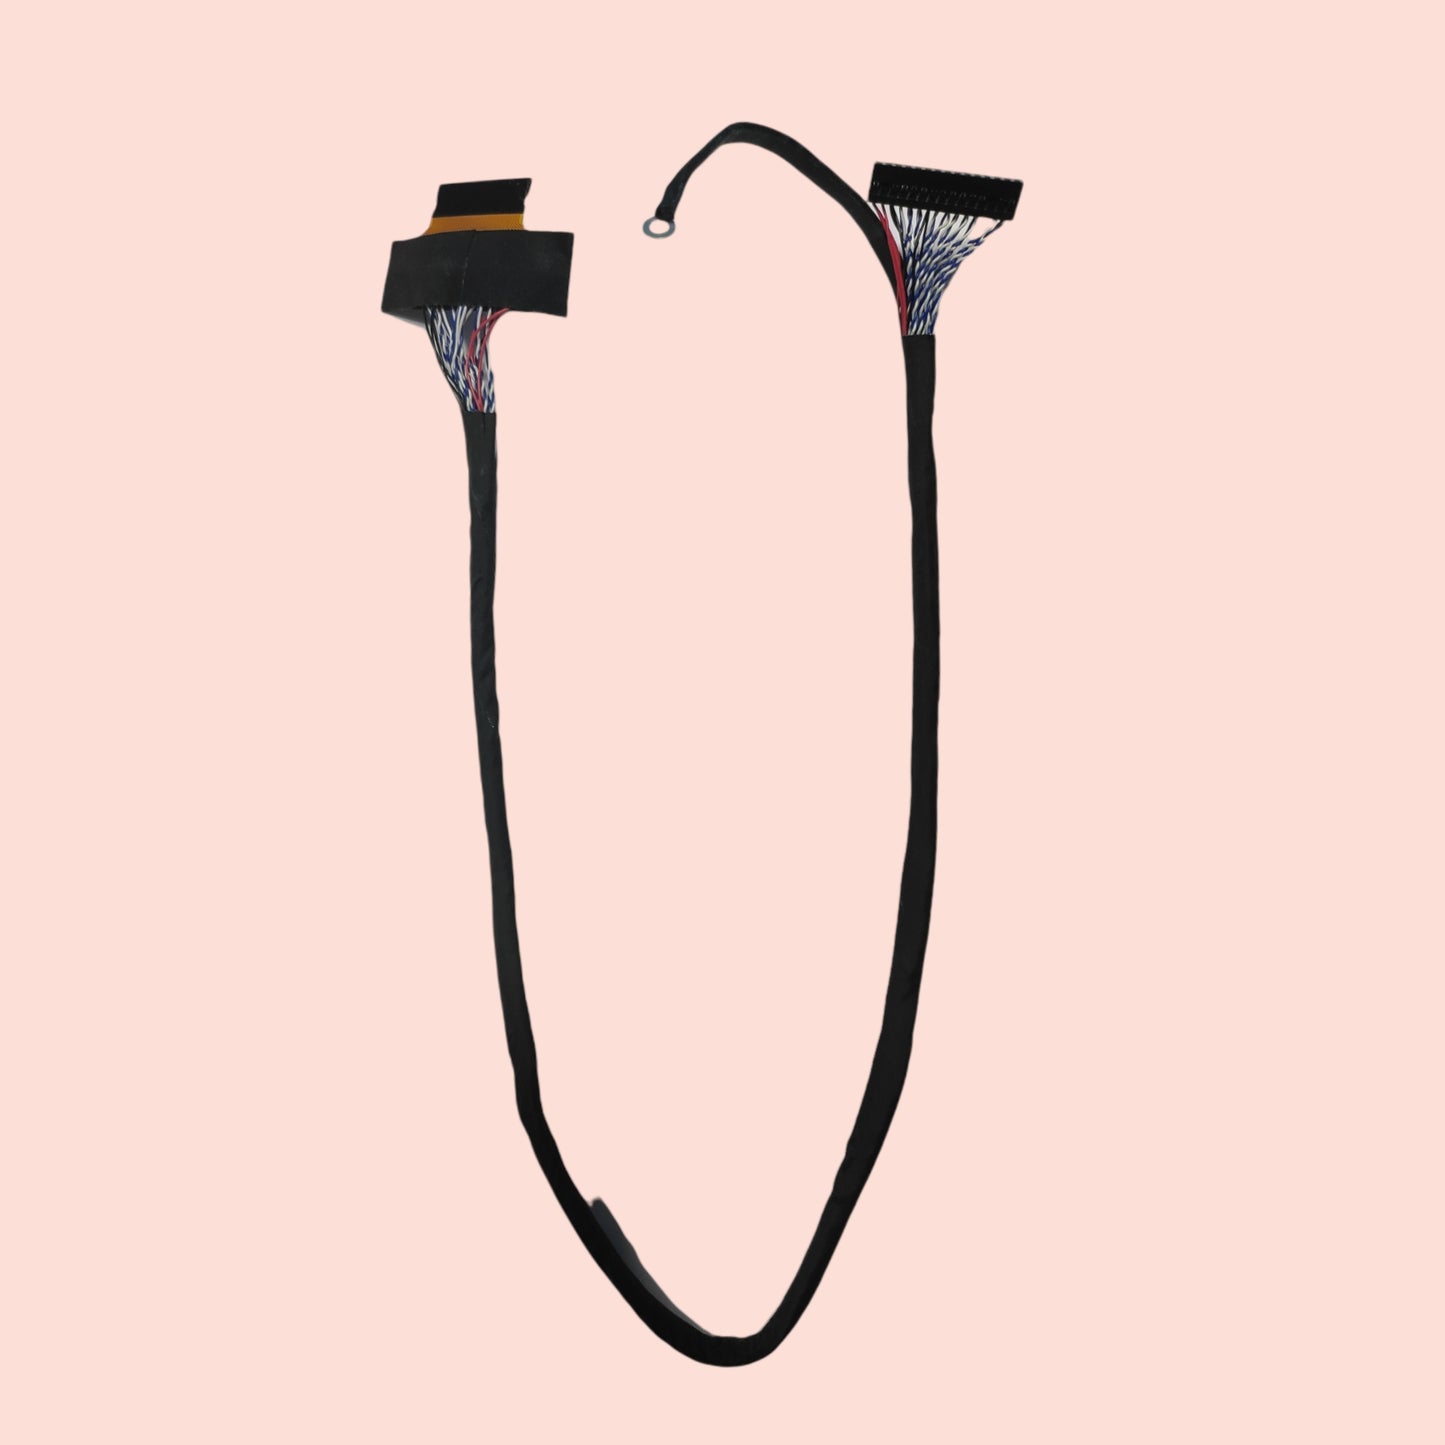 LVDS Cable 12 - Faritha